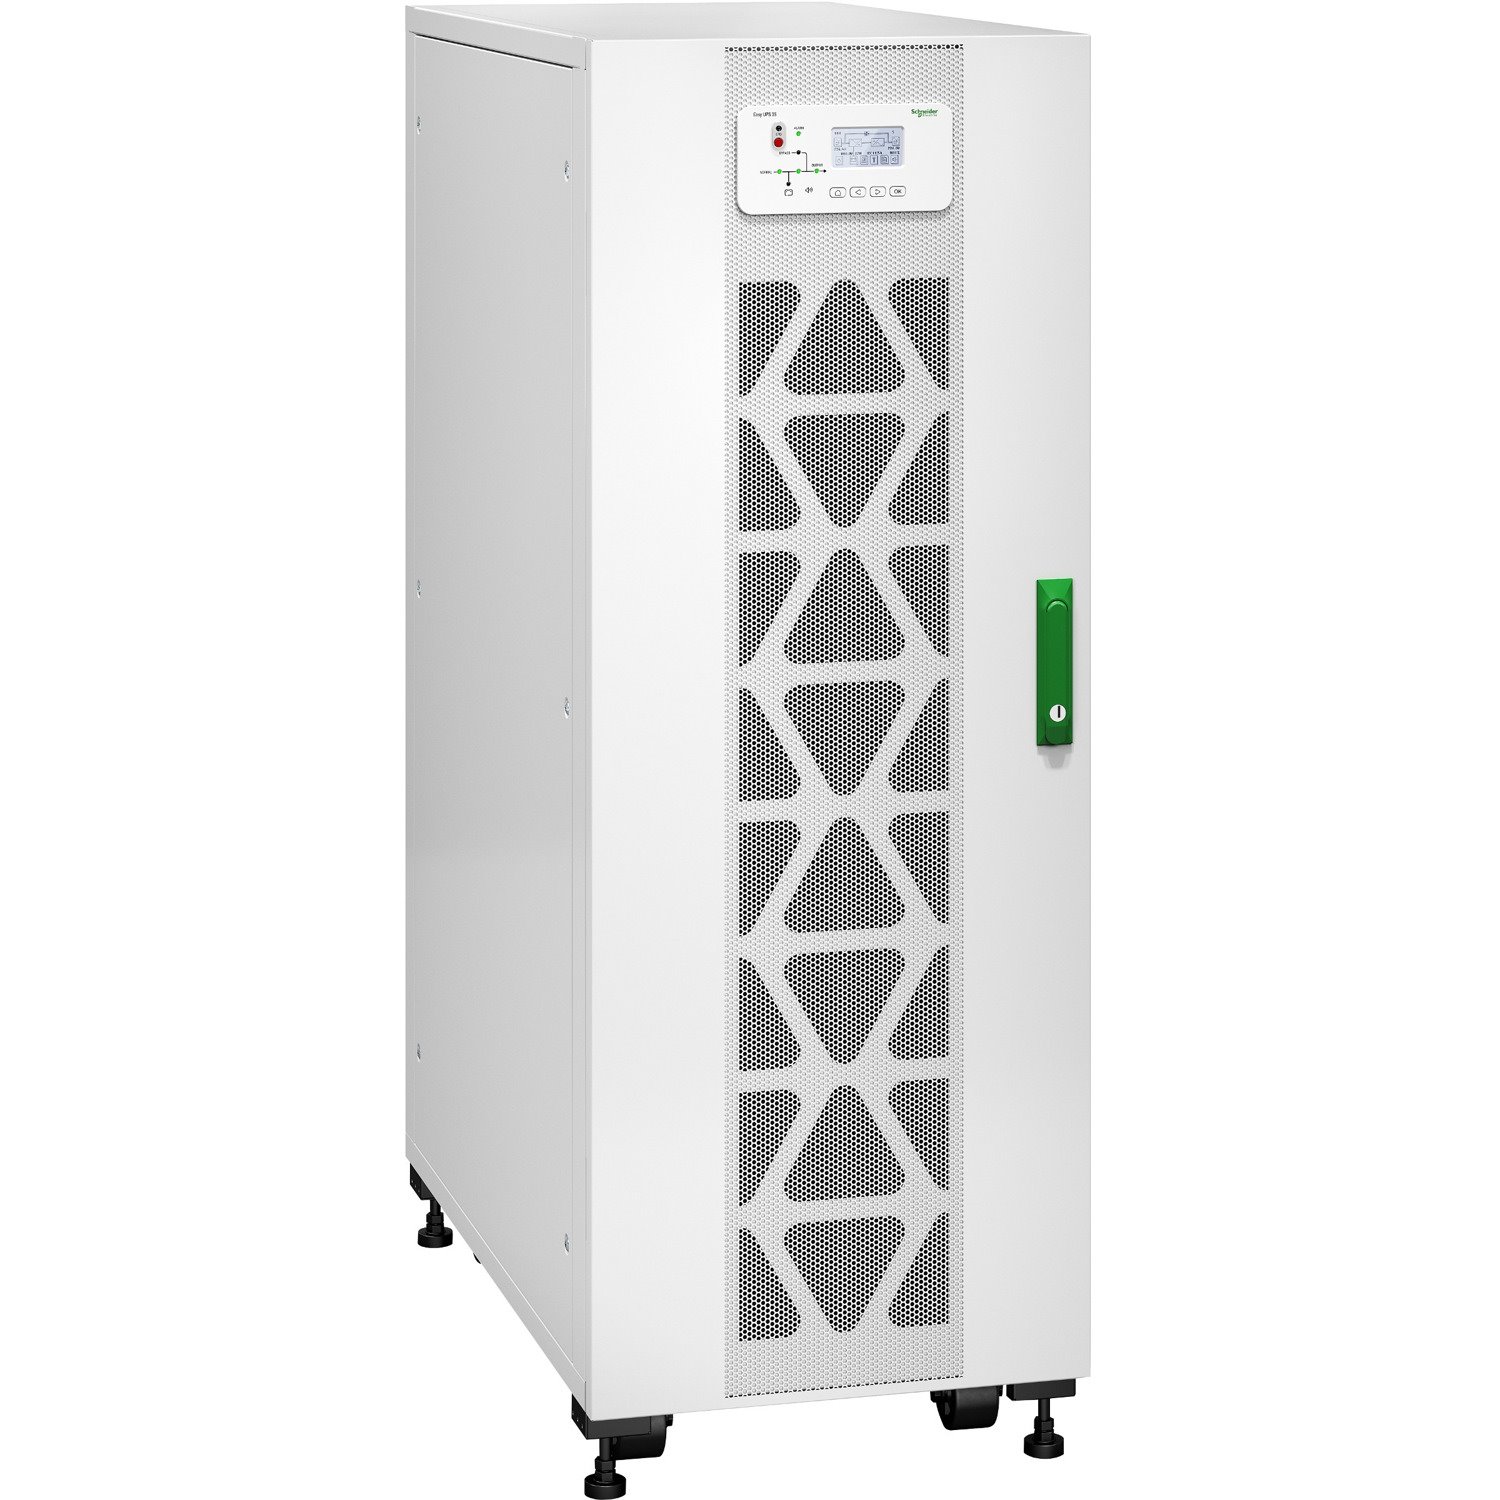 APC by Schneider Electric Easy UPS 3S Dual Conversion Online UPS - 30 kVA - Three Phase